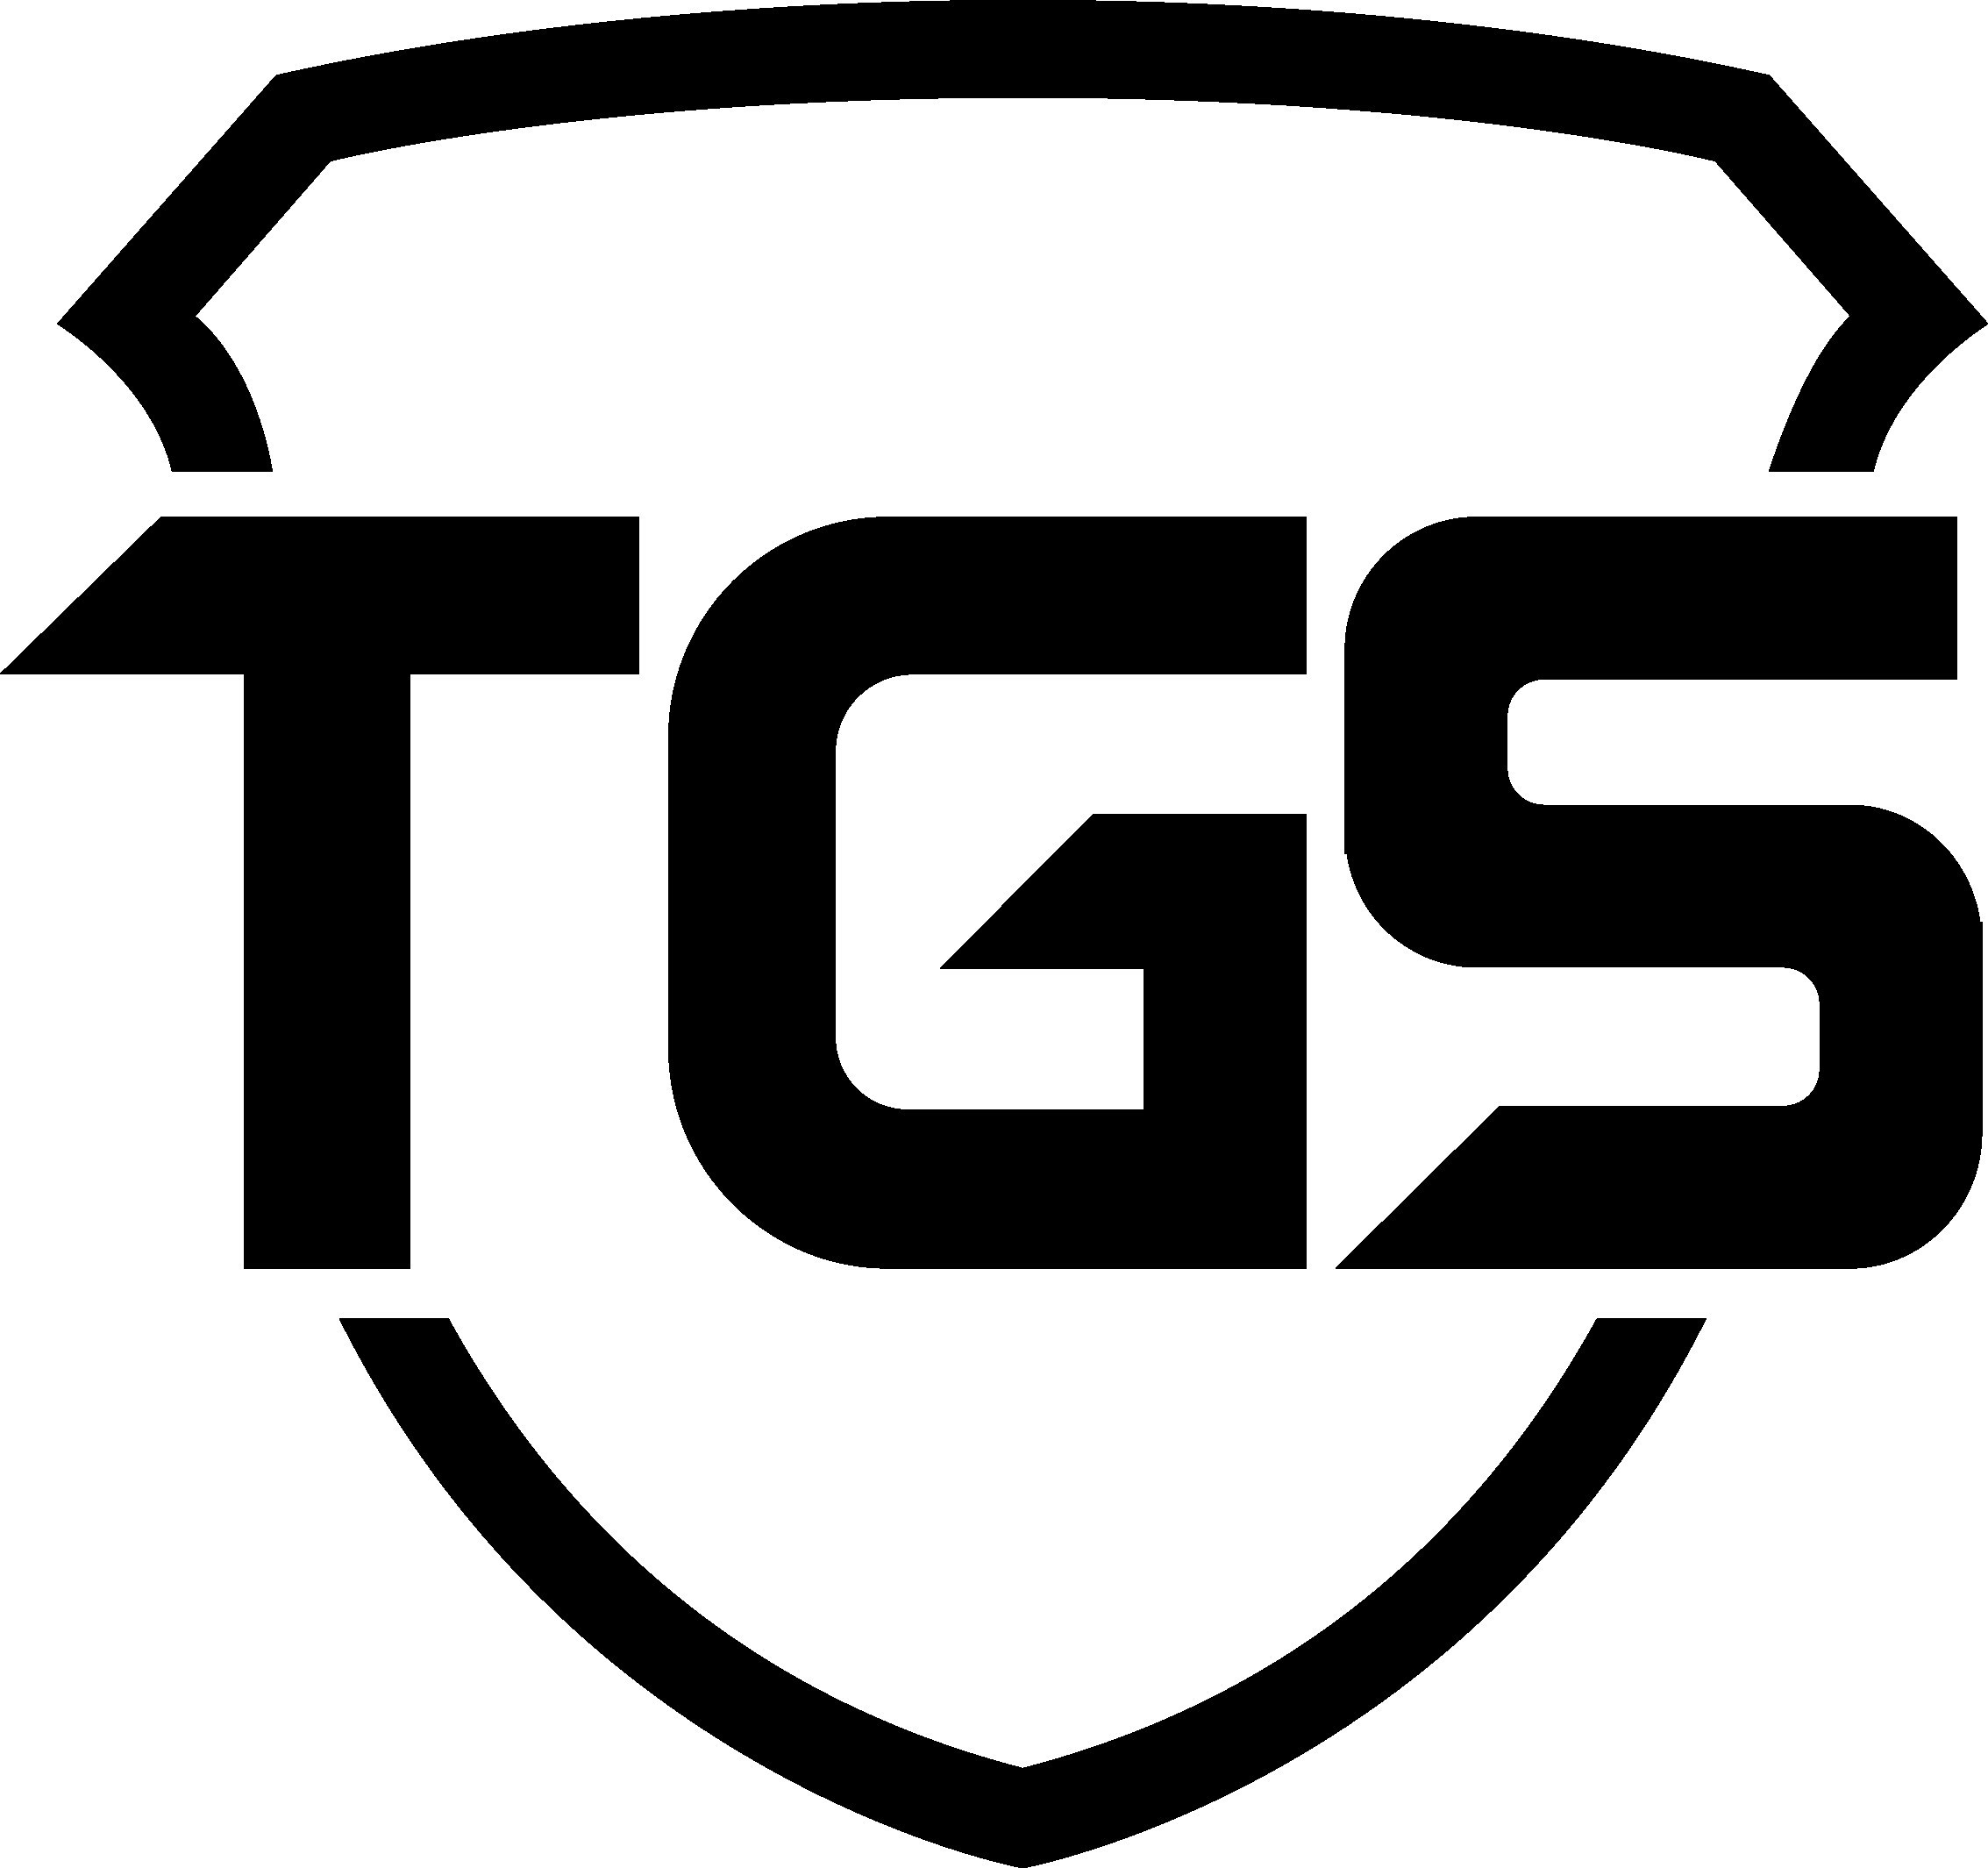 Tgs Esports Completes The Acquisition Of Canadian Scholastic Esports And Digital Media Organization Volcanic Media